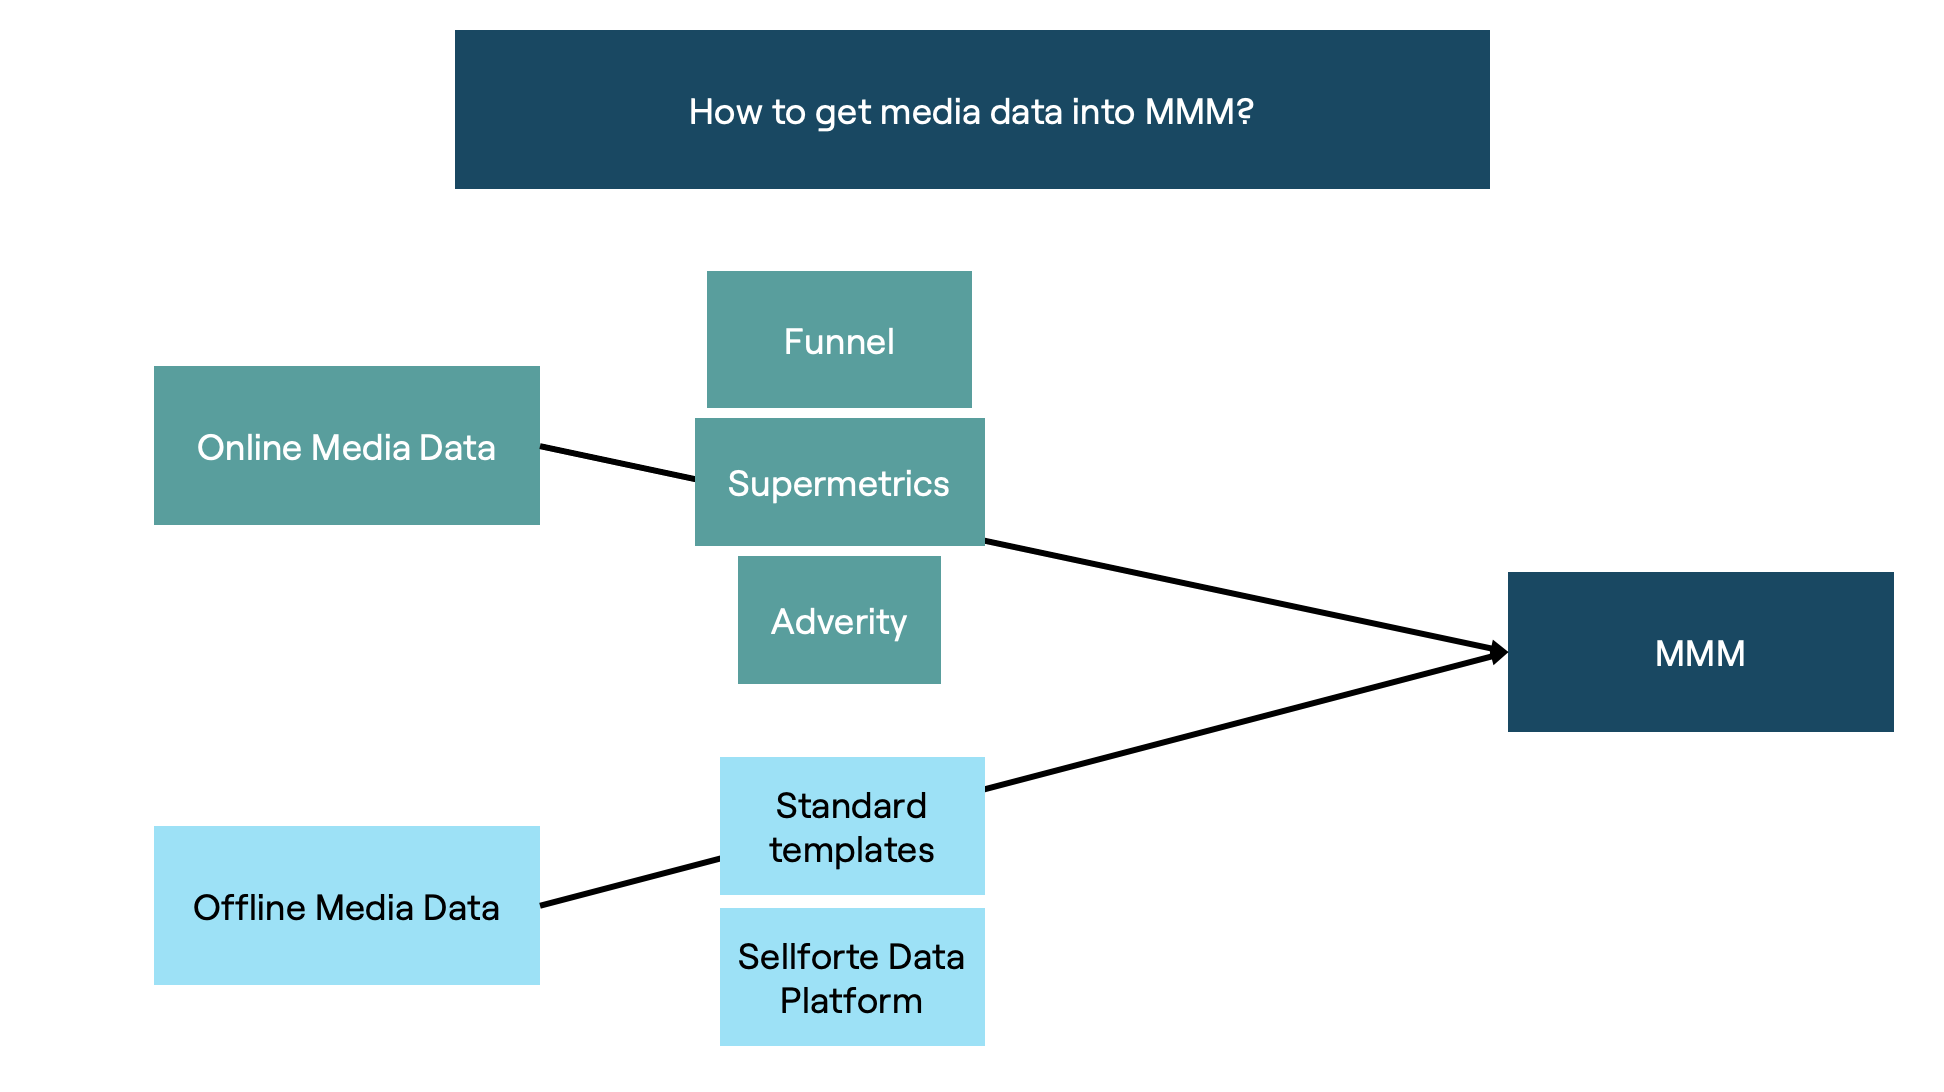 How to get media data into MMM?